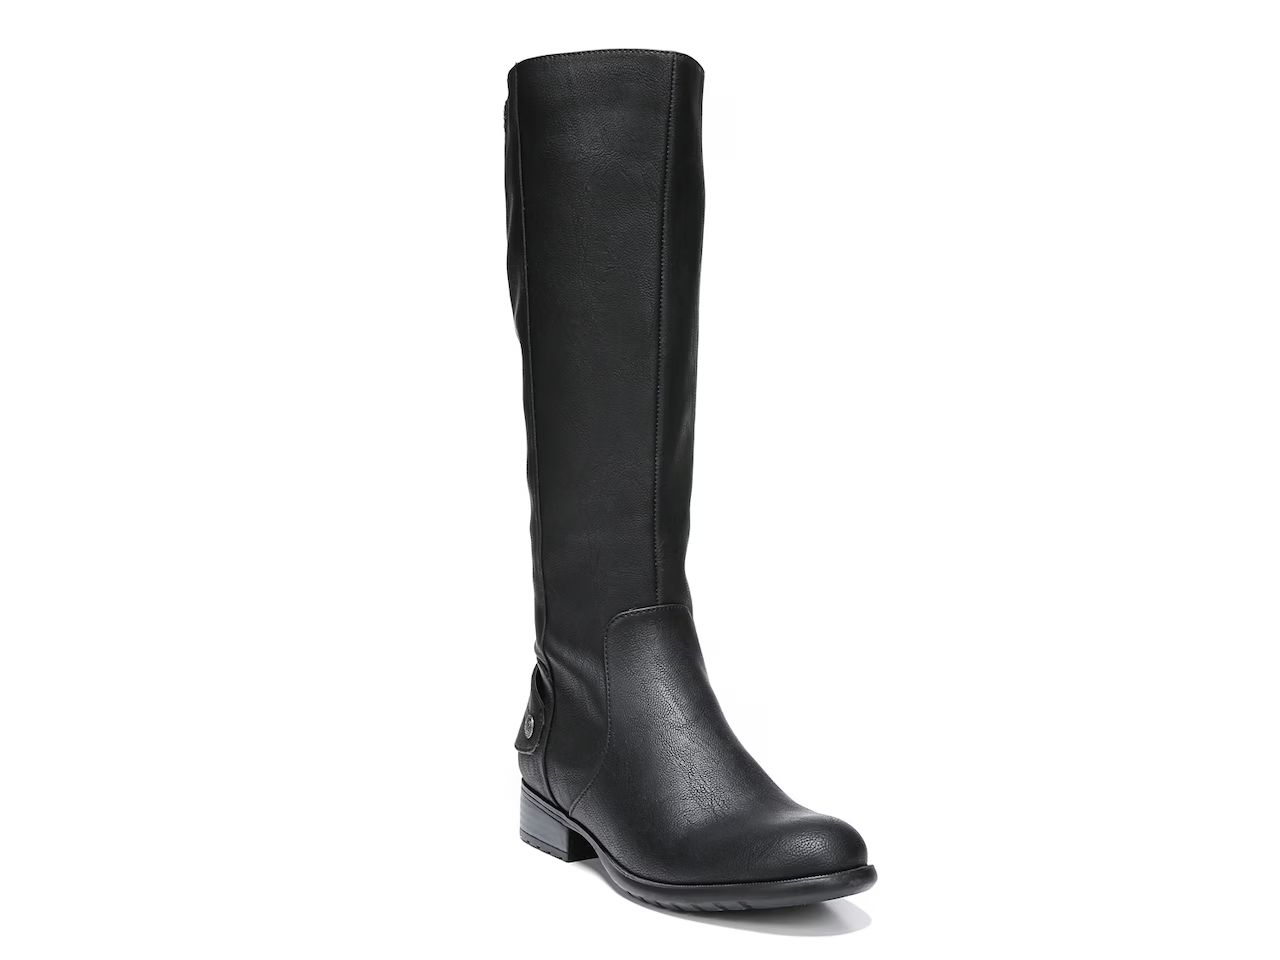 Xandy Wide Calf Riding Boot | DSW